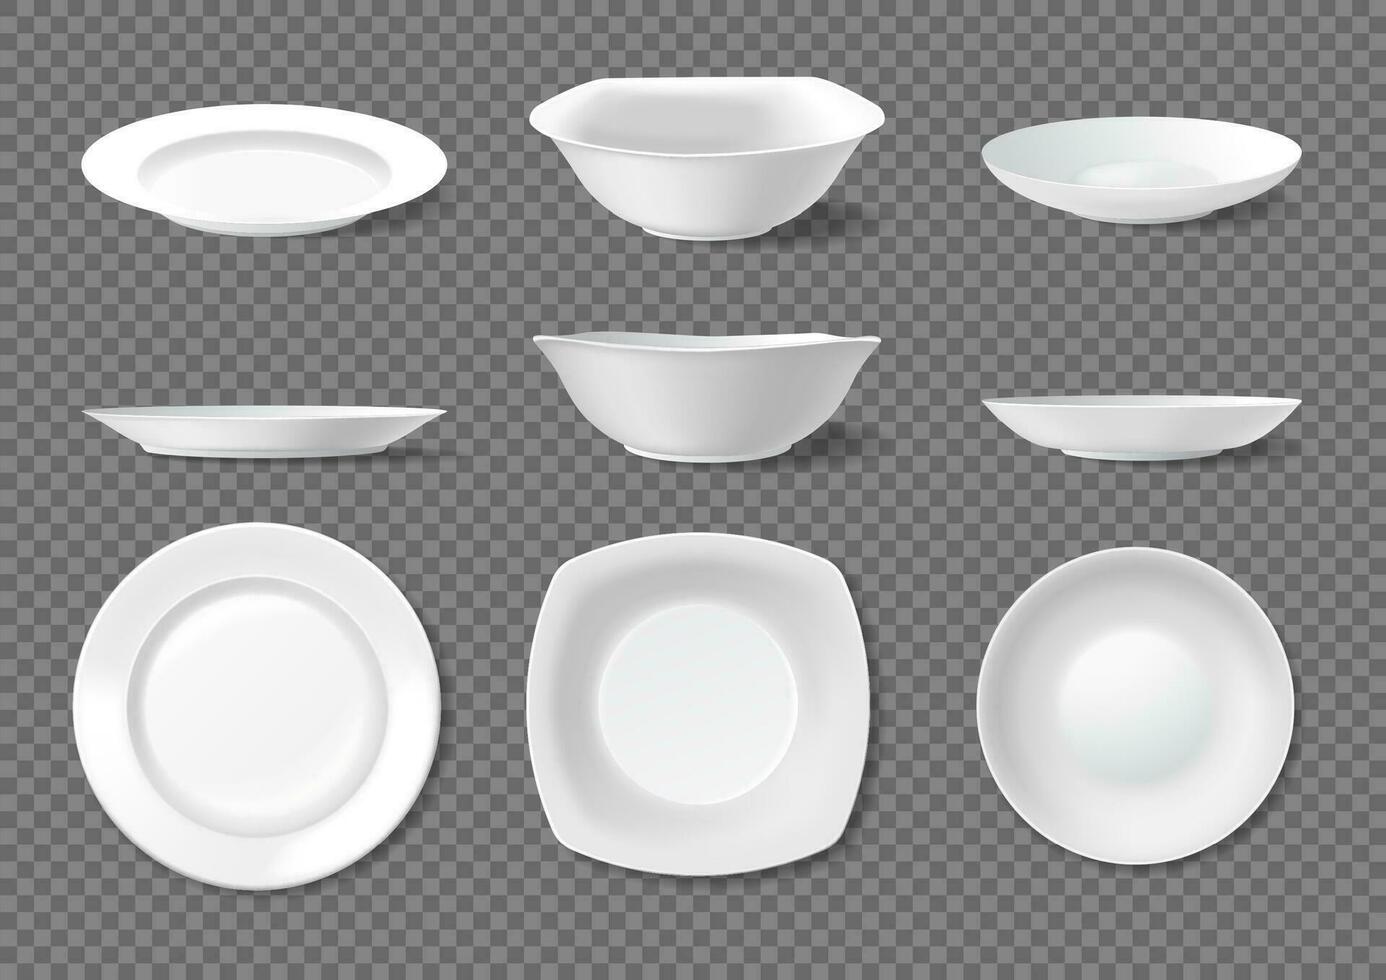 Realistic ceramic plates, empty white dishes top and side view. Porcelain plate and bowl, kitchen crockery, ceramic dinnerware vector set